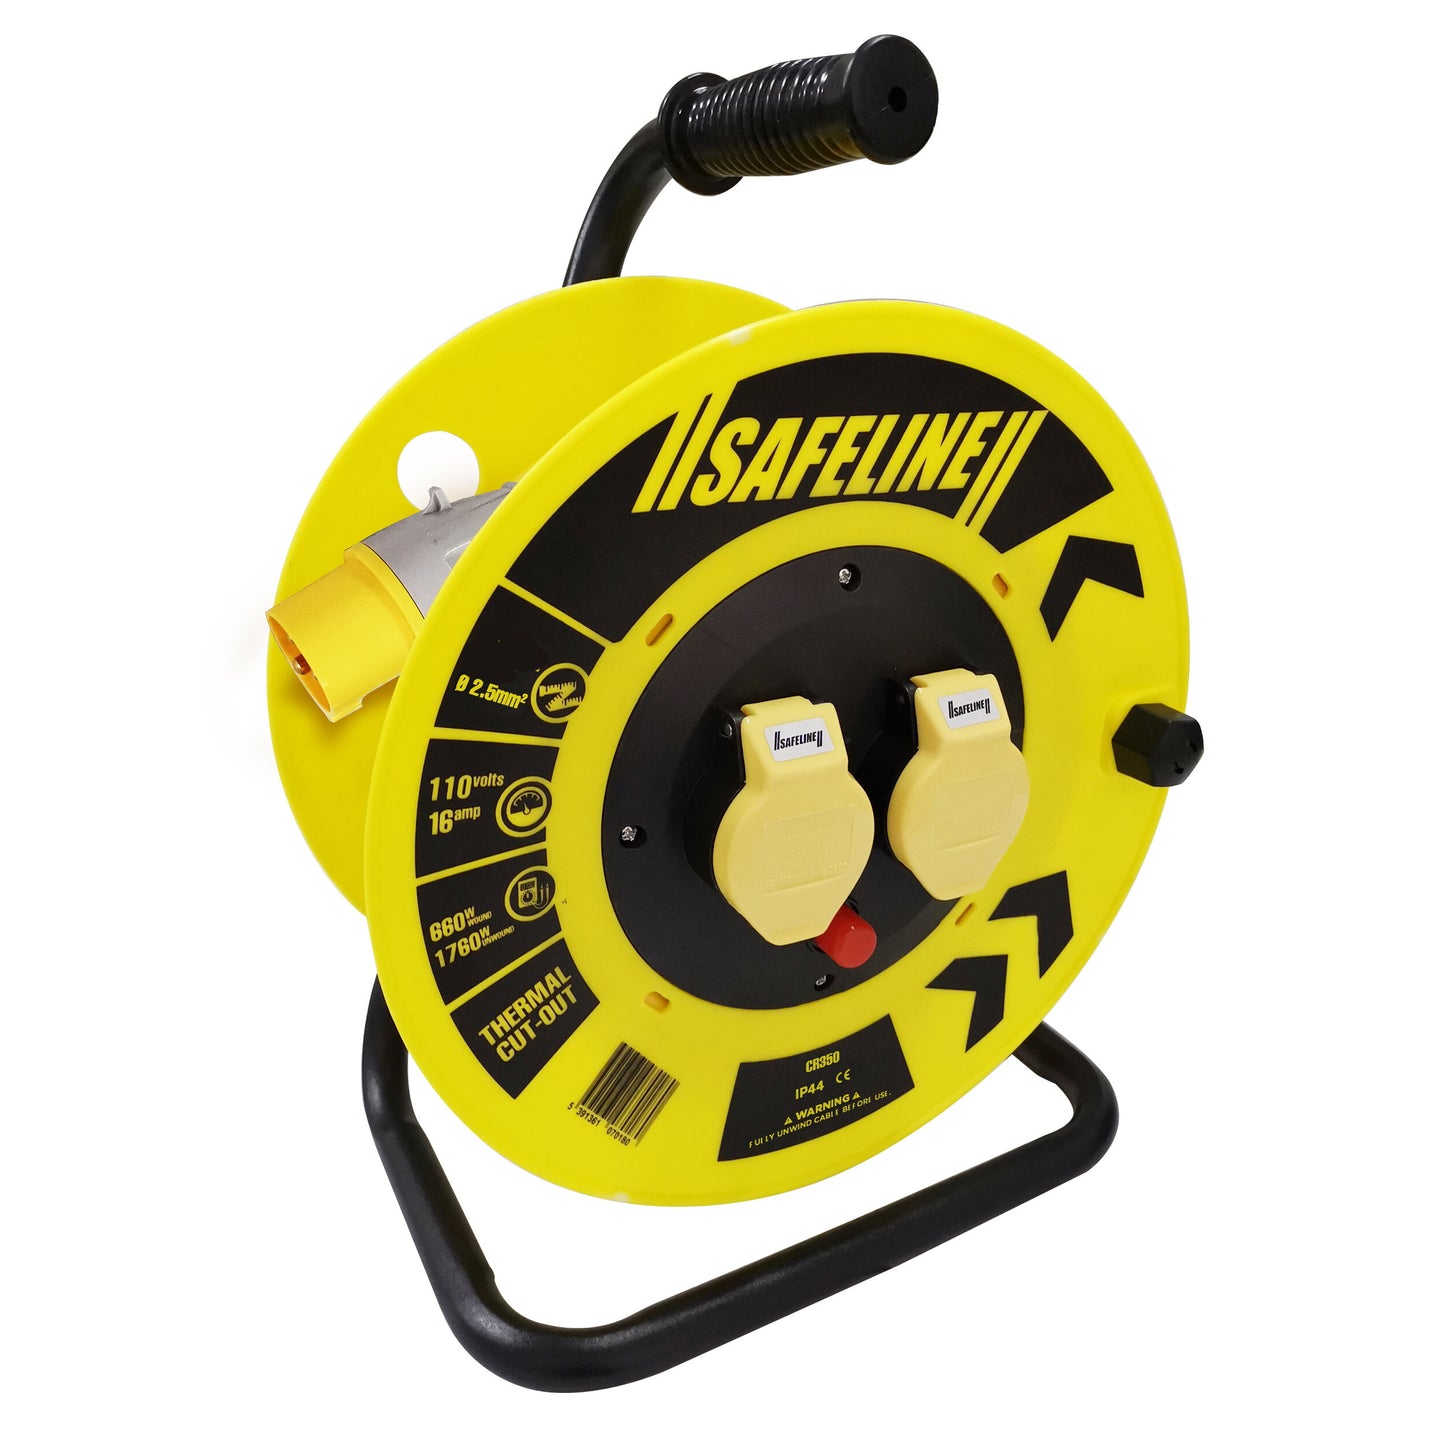 SAFELINE 25M 110V 2.5SQ YELLOW CABLE REEL